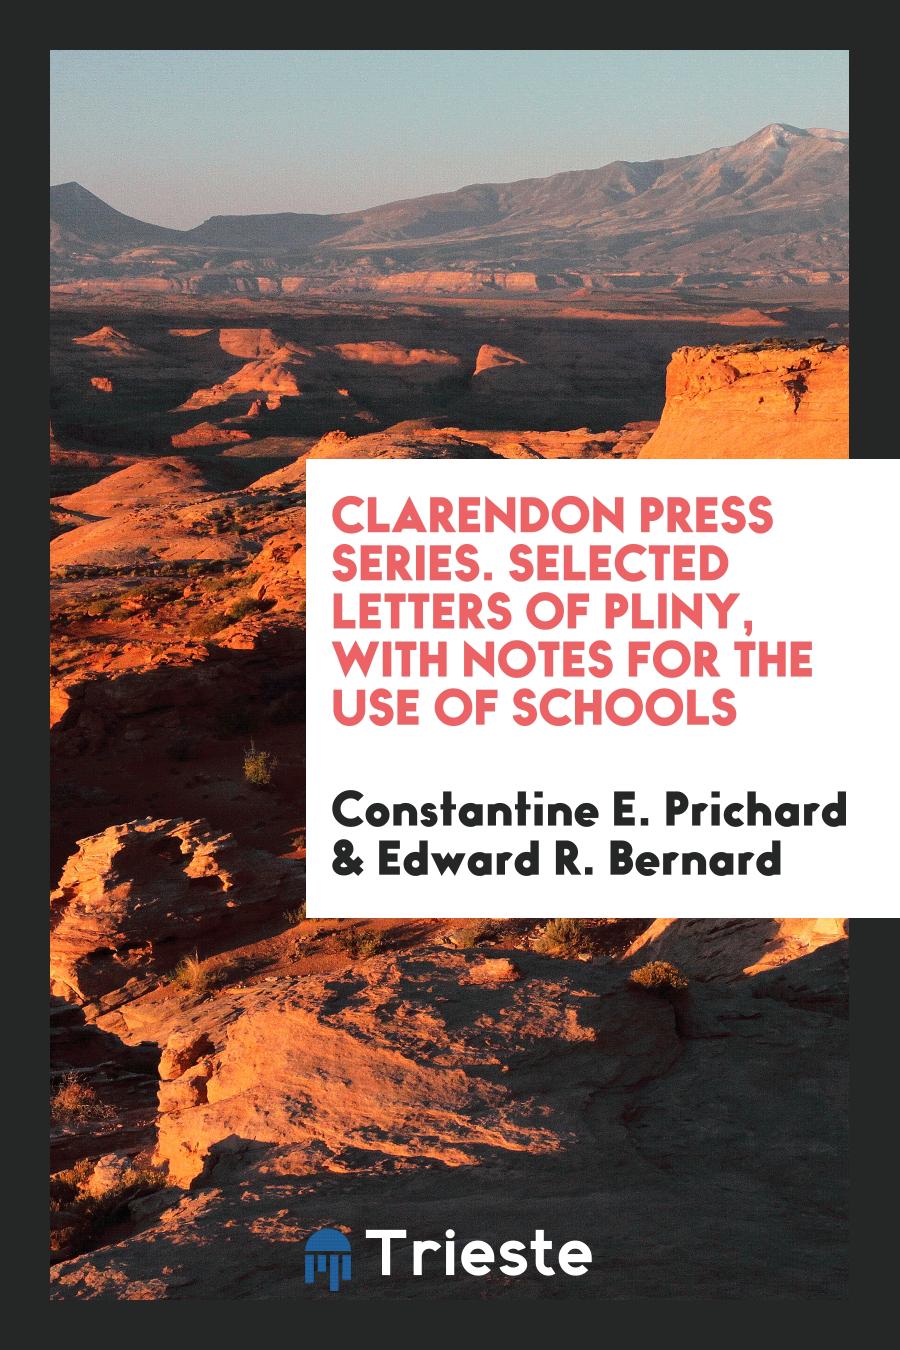 Clarendon Press Series. Selected Letters of Pliny, with Notes for the Use of Schools